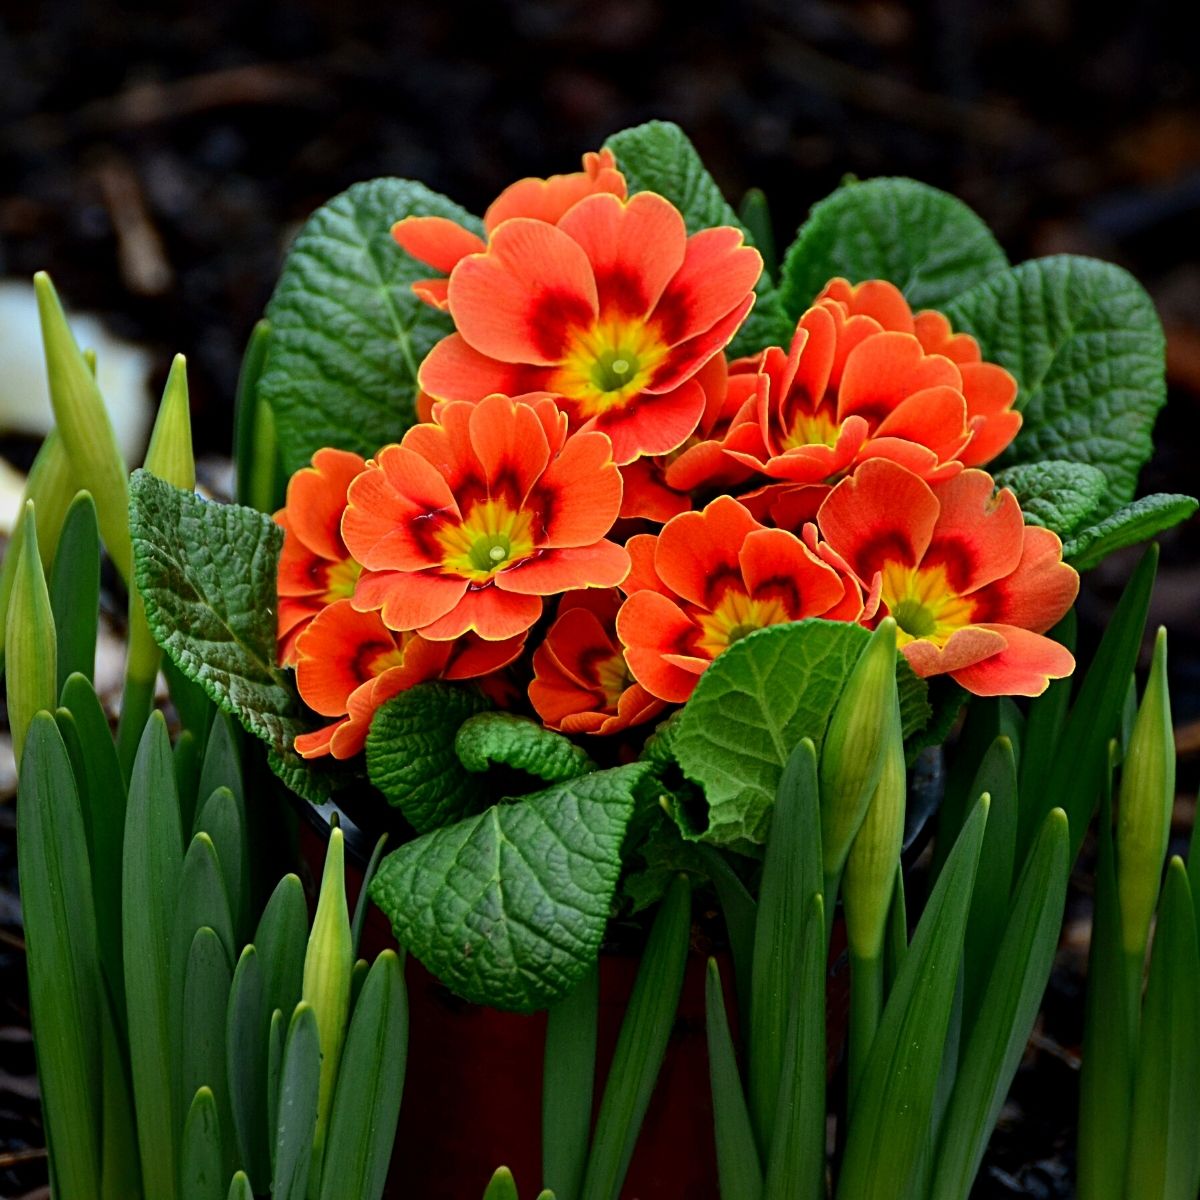 It's the Perfect Time for Primulas